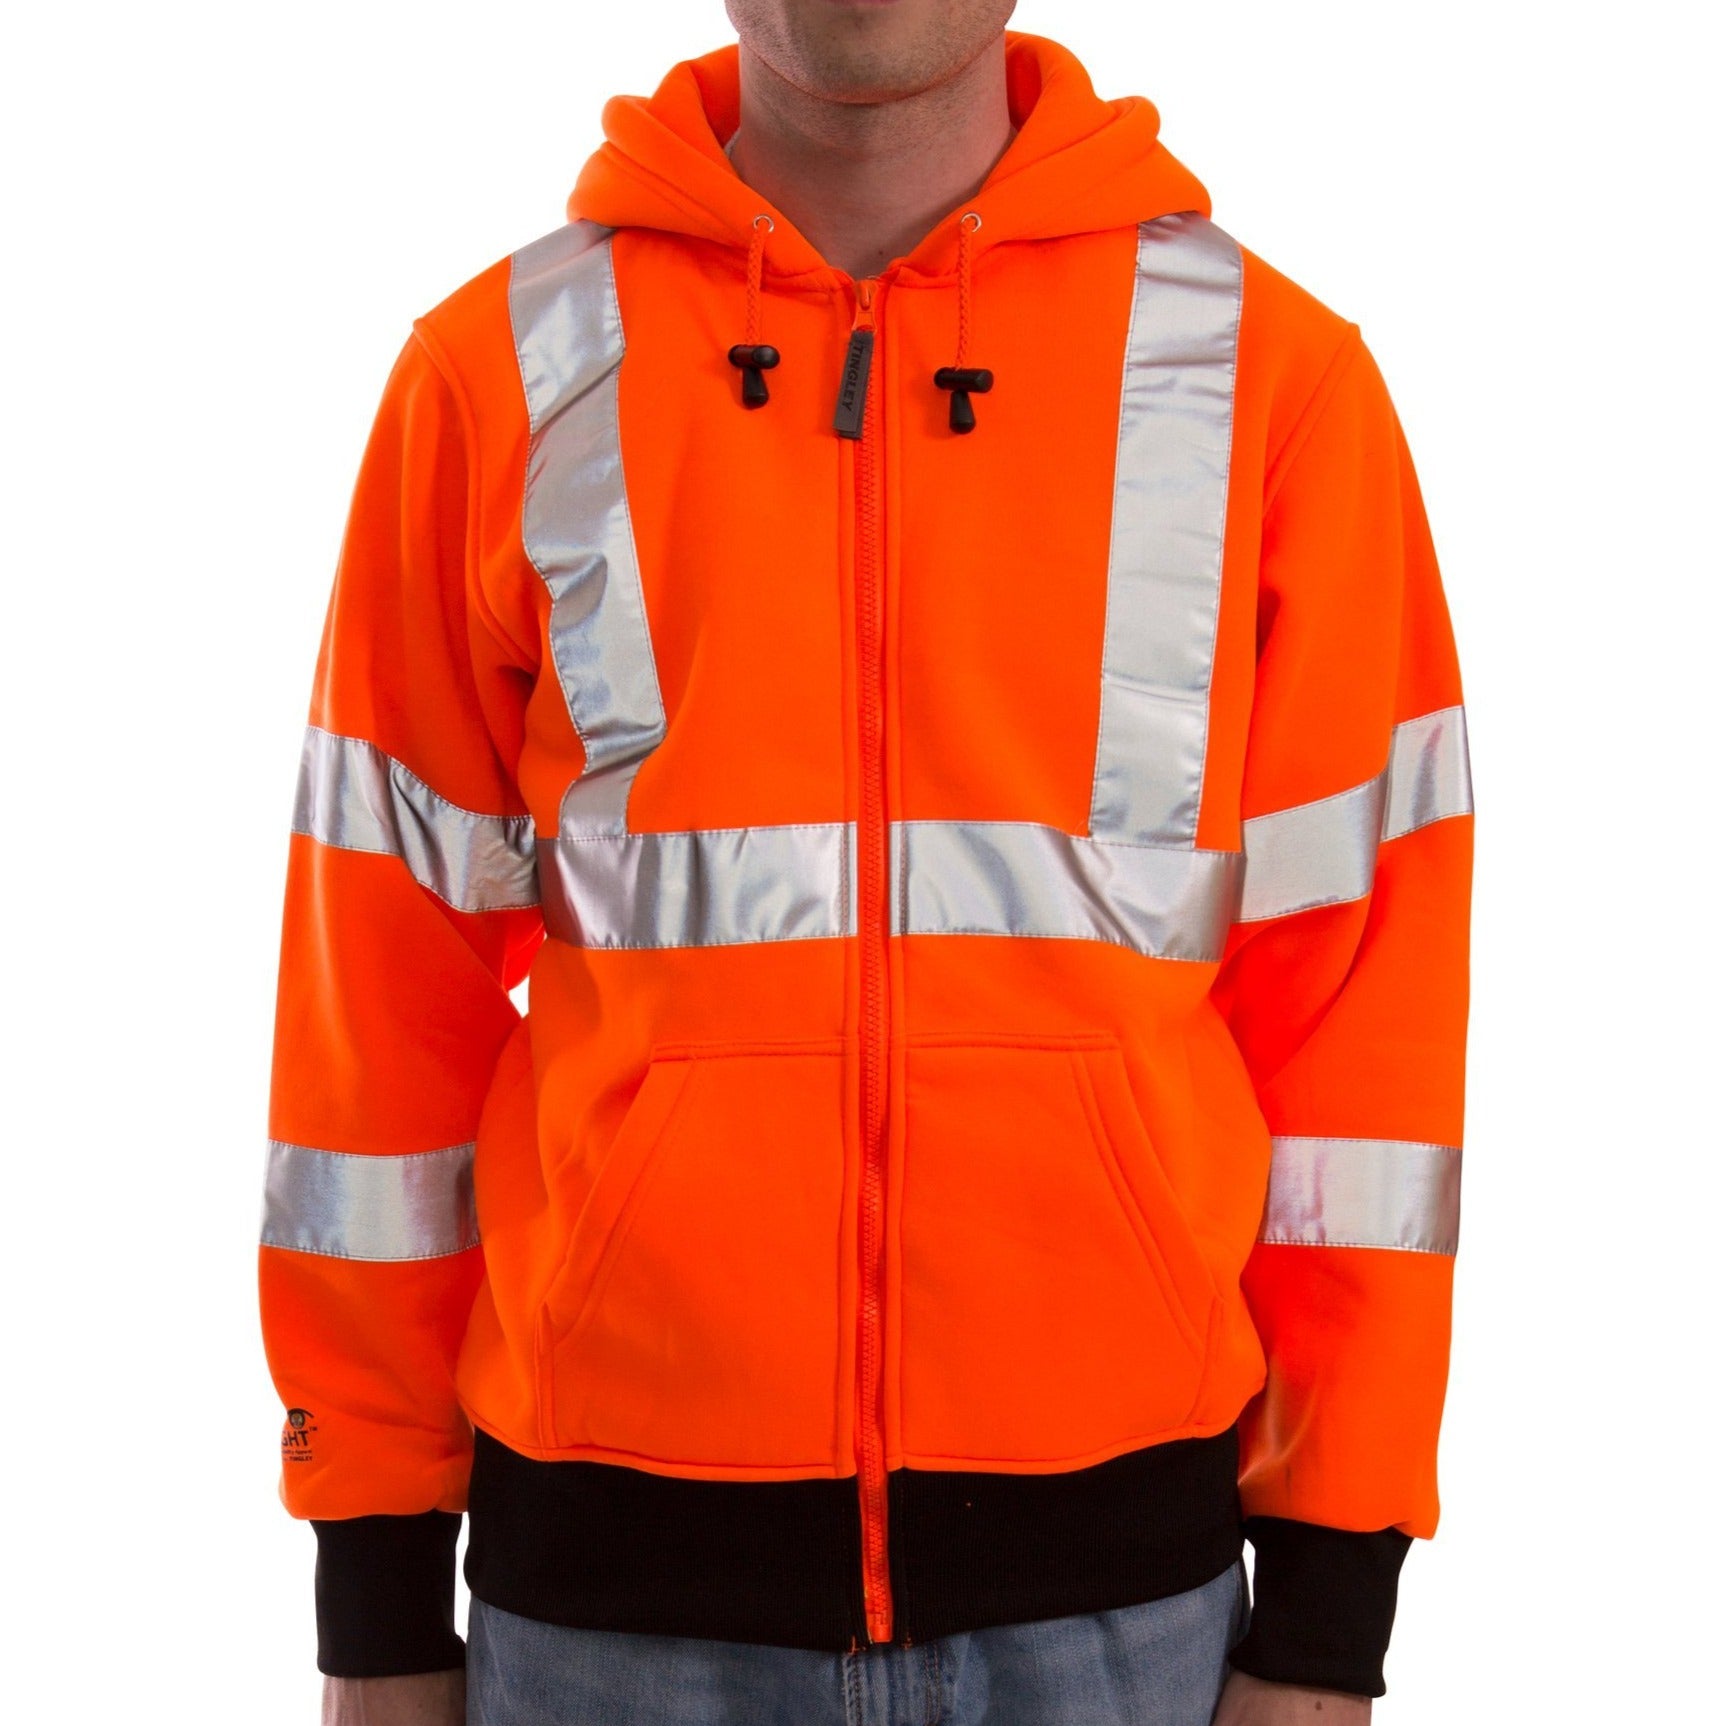 Tingley S78122 & S78129, Class 3 Hooded High Visibility Sweatshirt